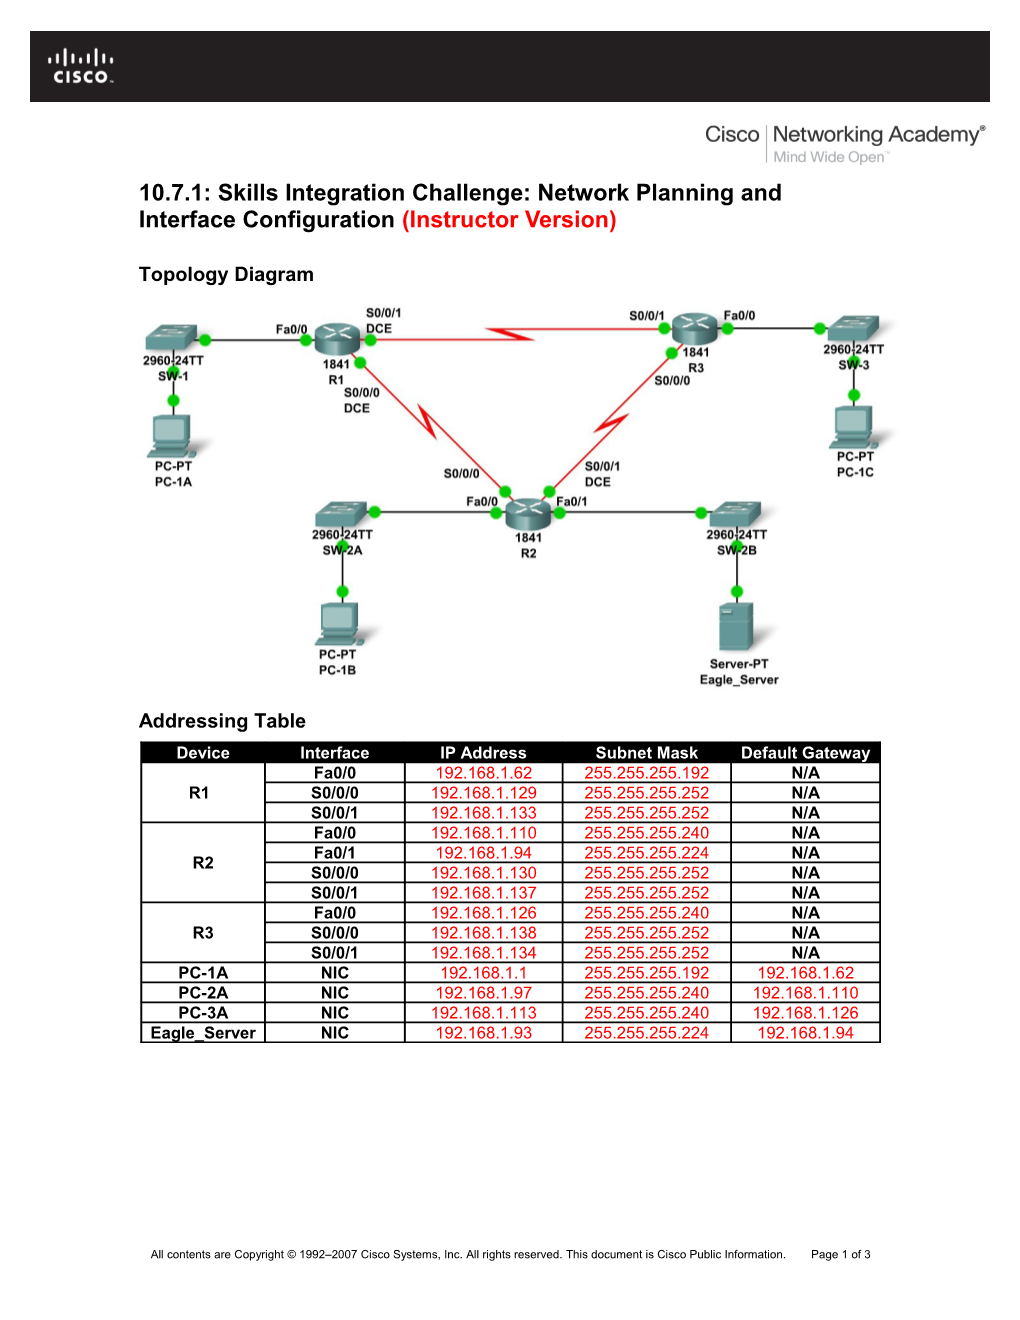 10.7.1: Skills Integration Challenge: Network Planning and Interface Configuration (Instructor